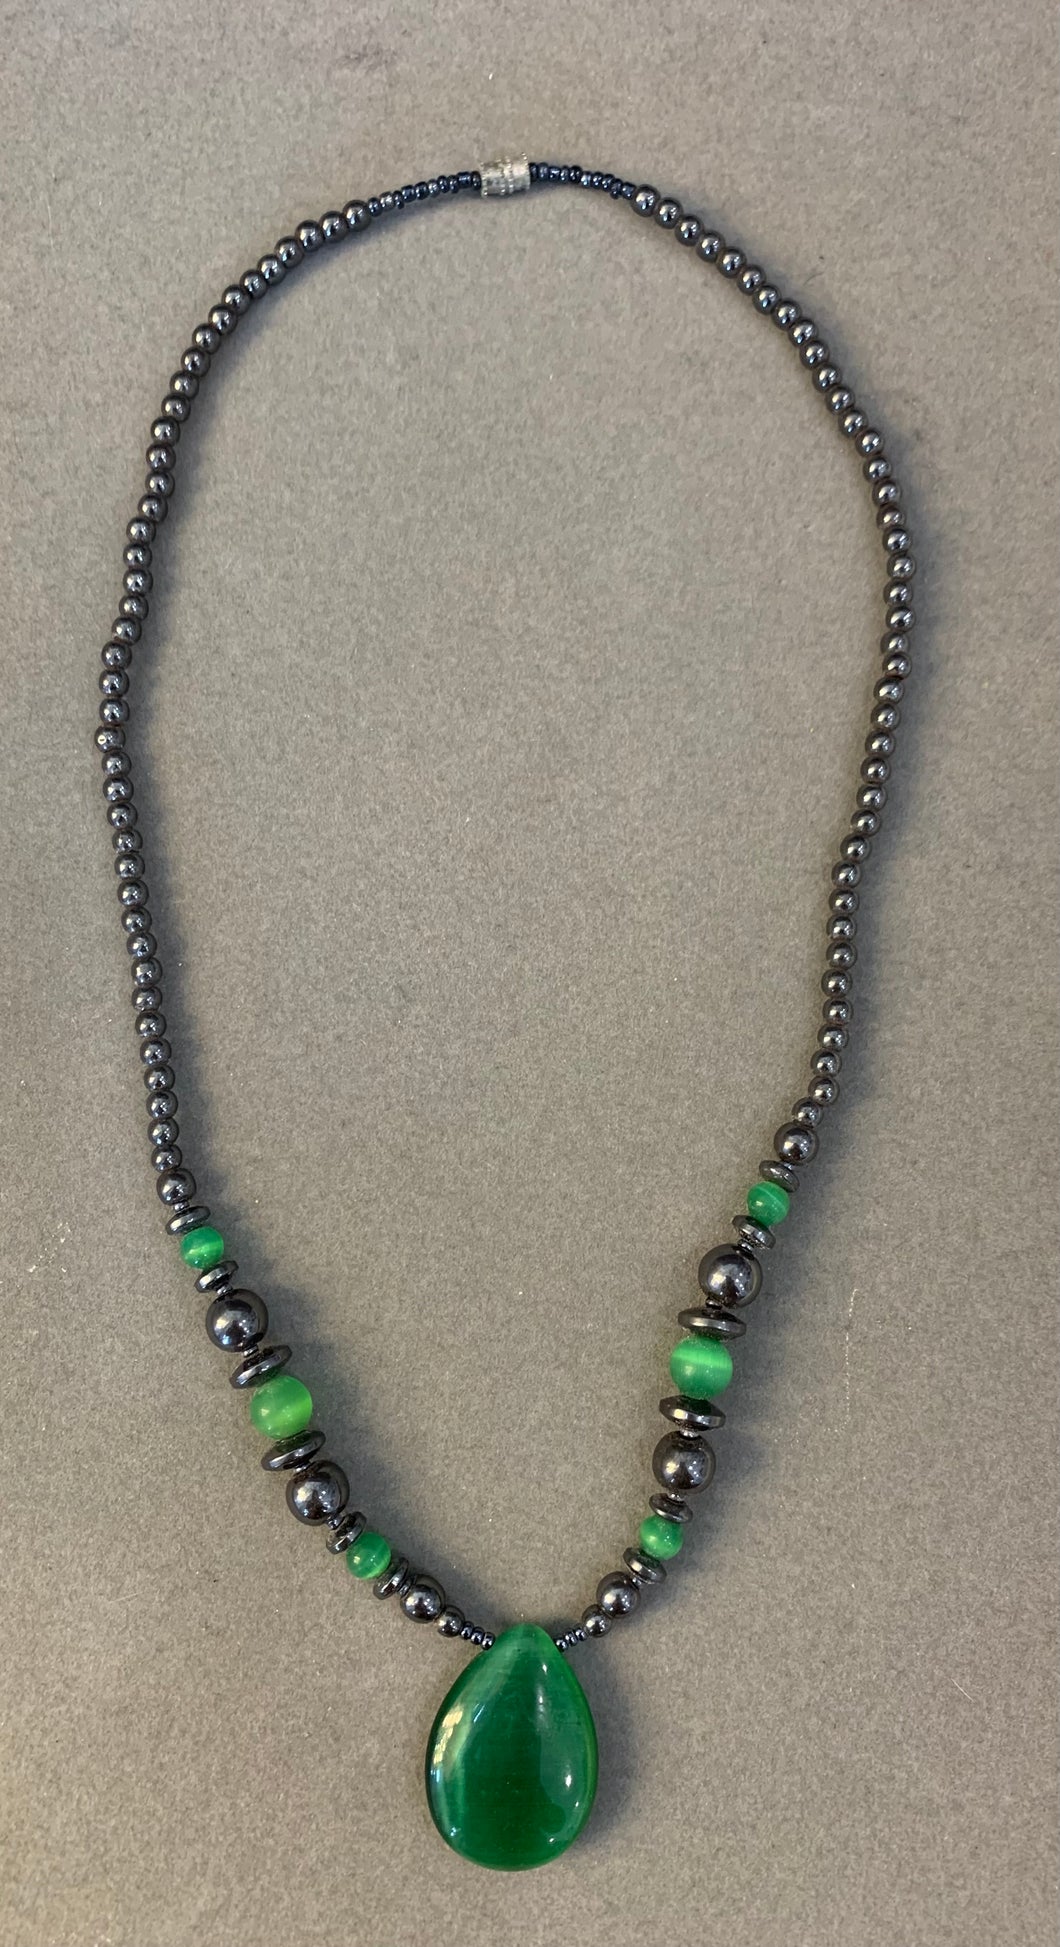 Hematite and Cat's Eye Necklaces